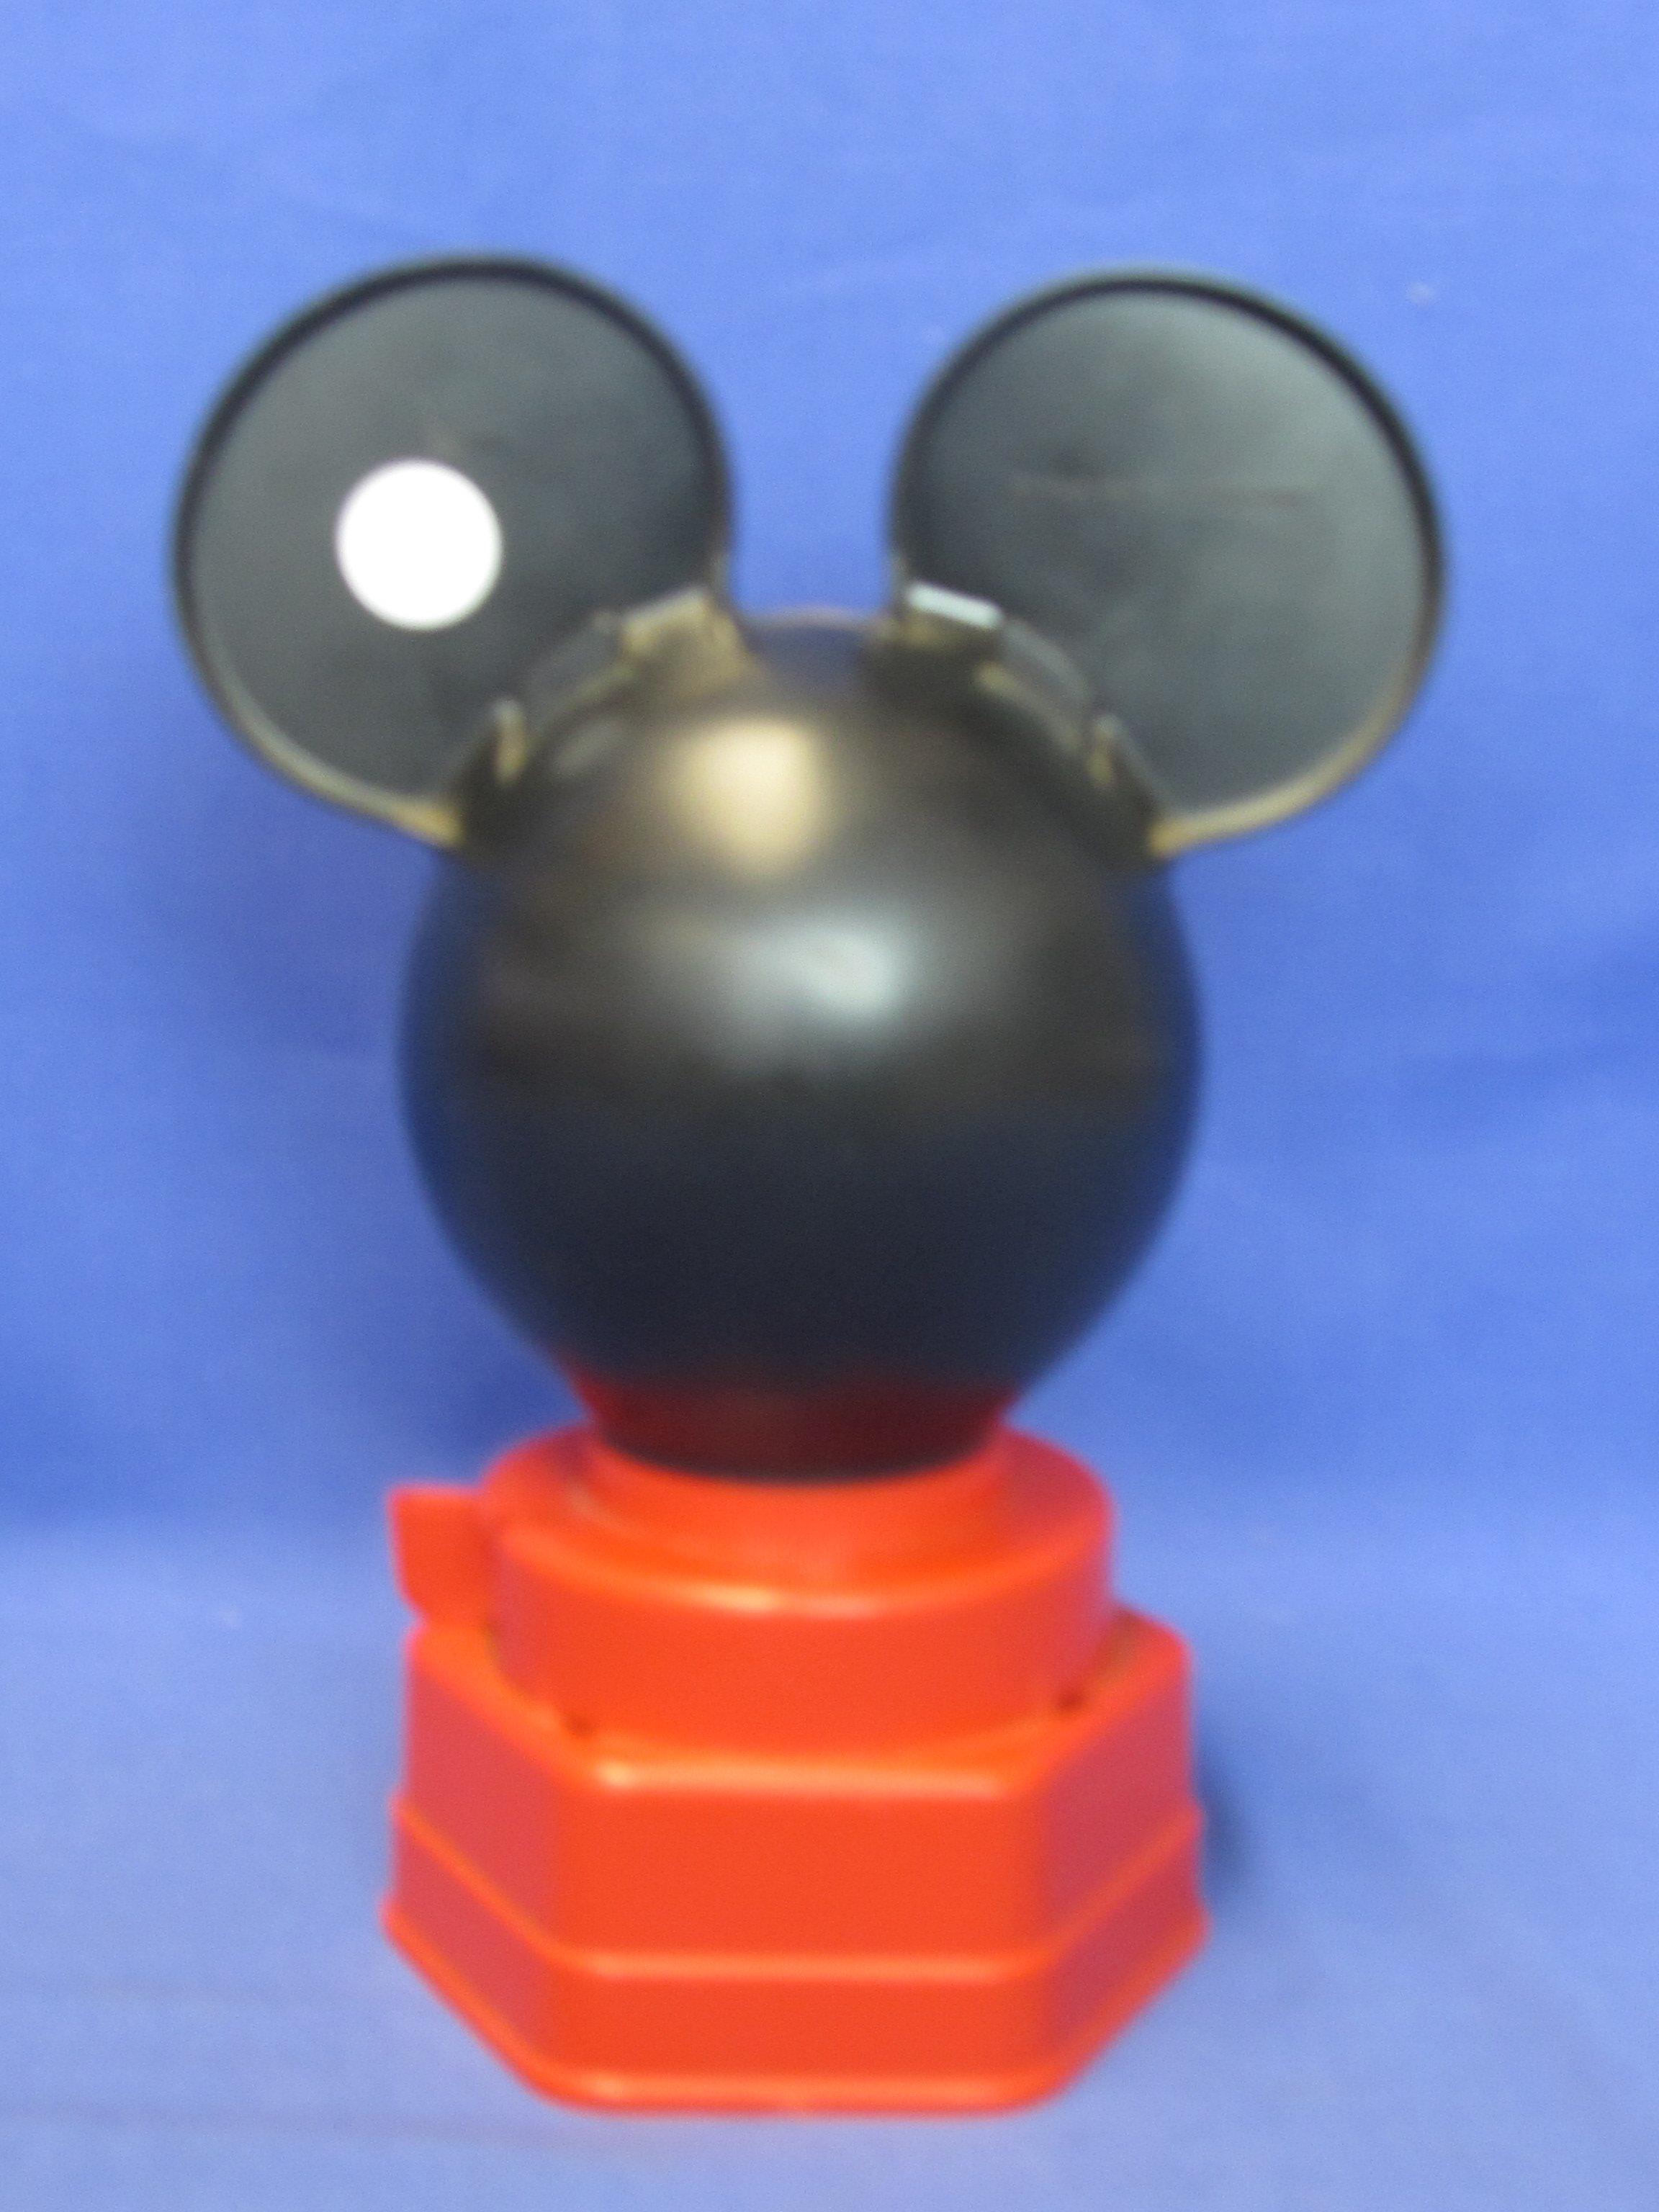 Hasbro 1968 Mickey Mouse Gumball Machine Bank – appx 9” Tall – Good to Very Good Vintage Cond.